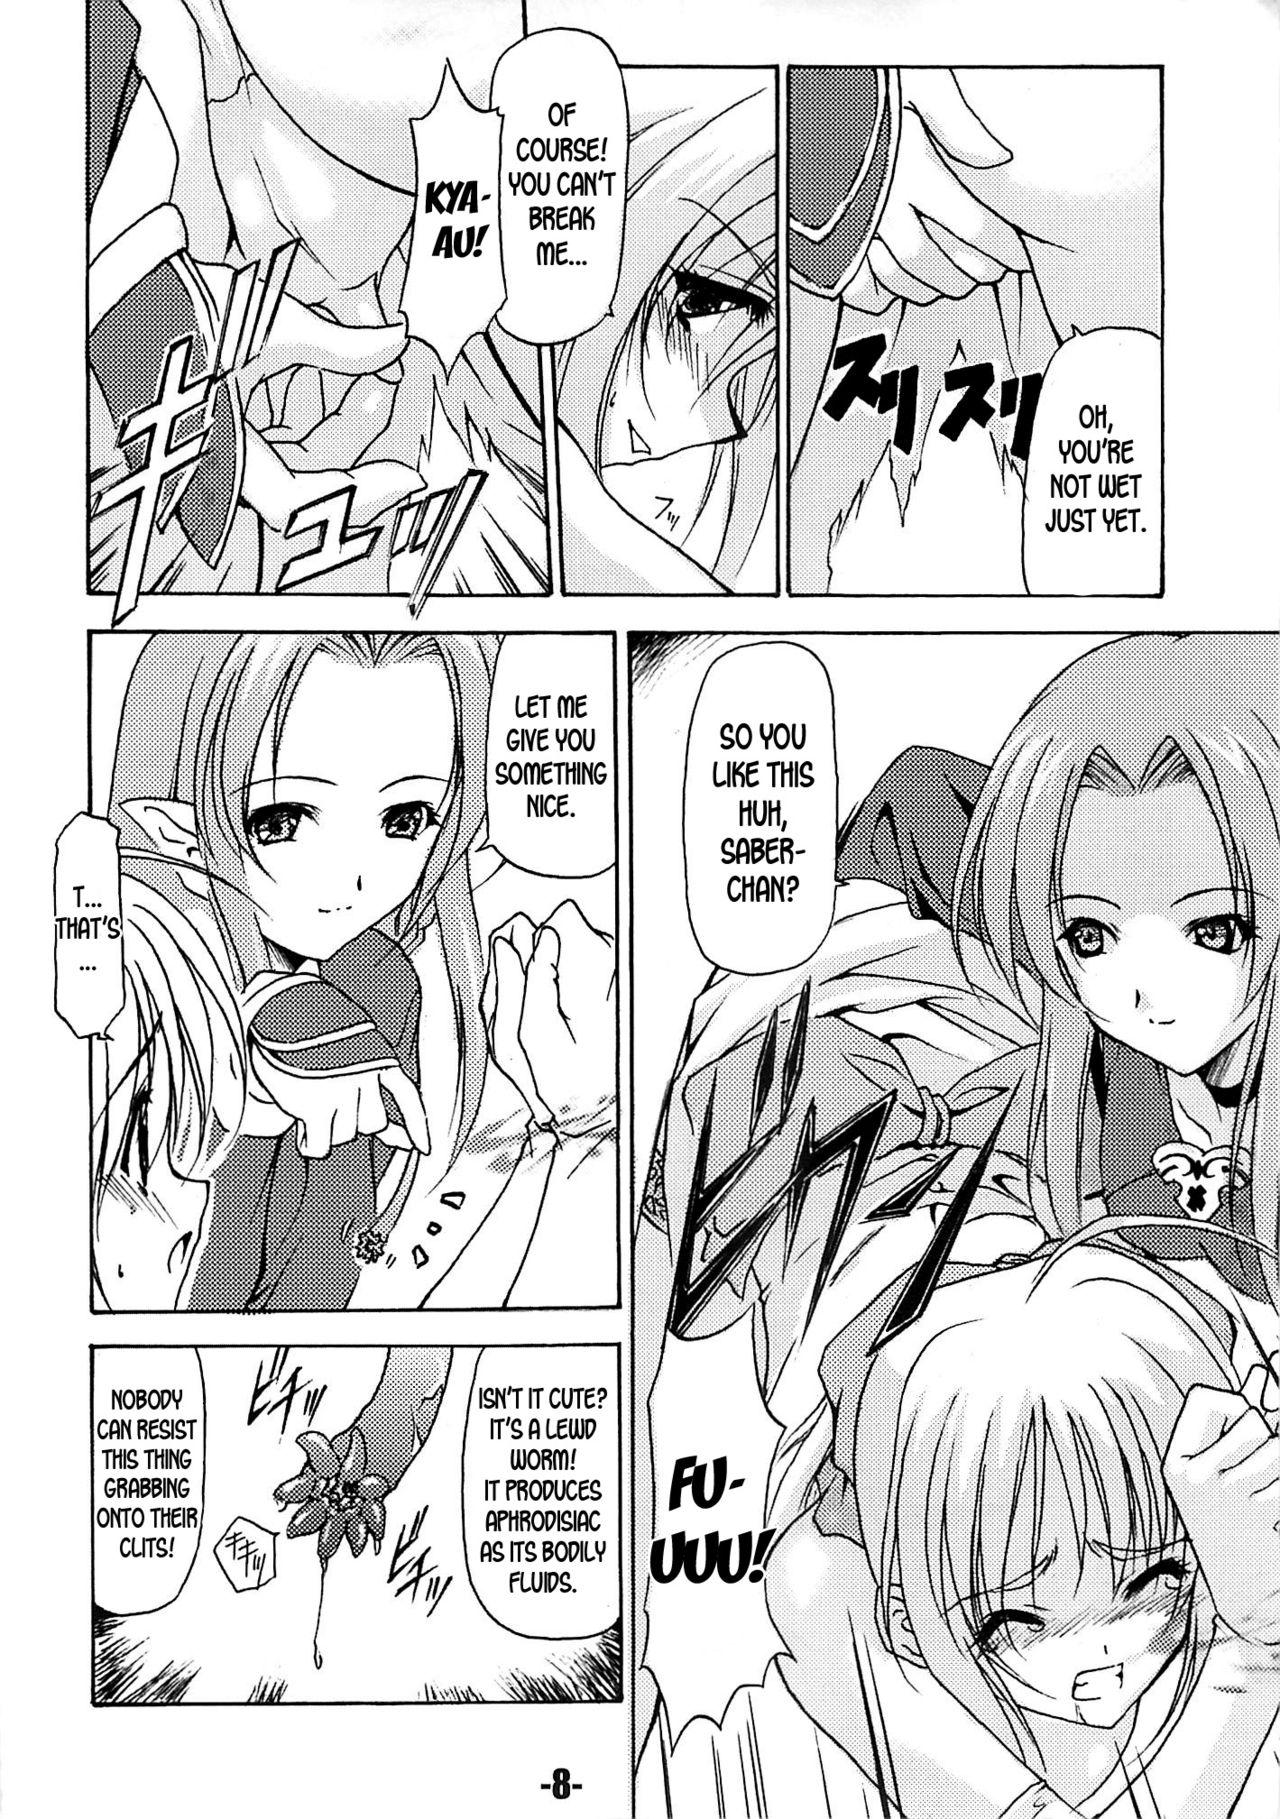 Mistress EXtra stage vol. 13 - Fate stay night Crazy - Page 7